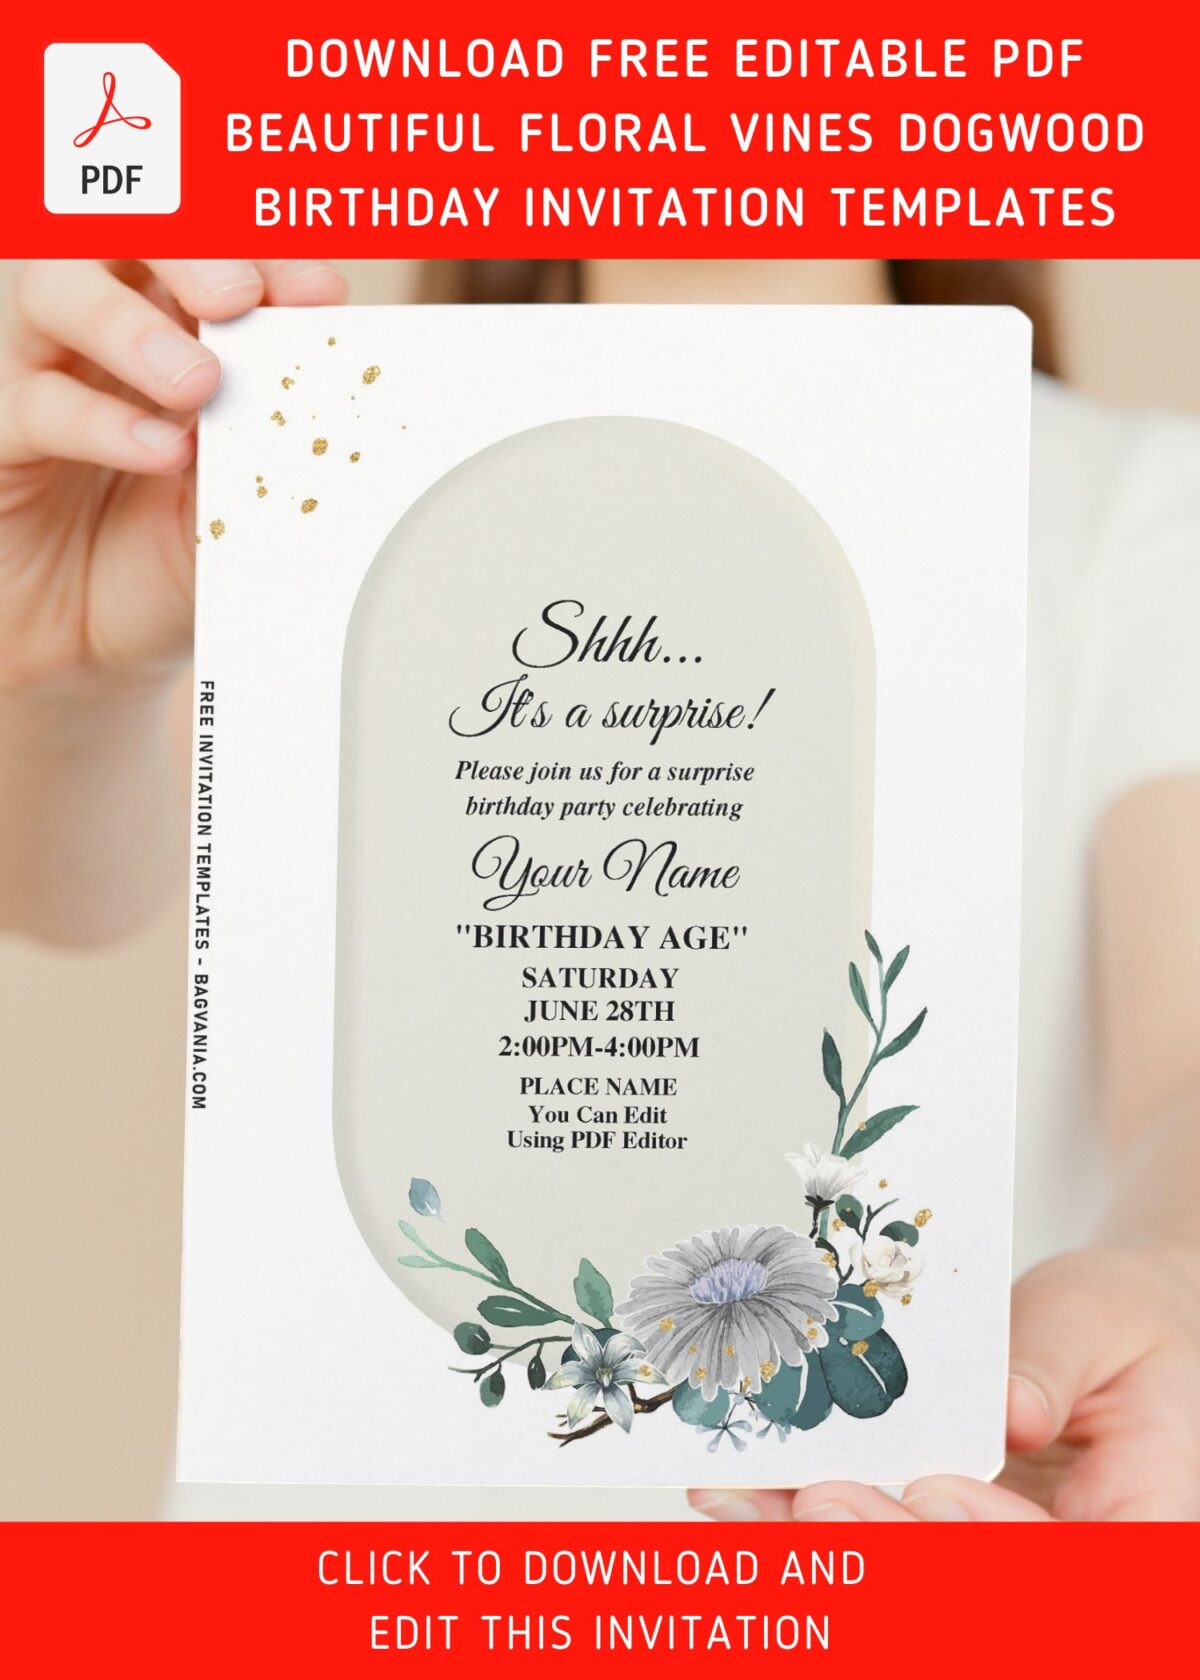 (Free Editable PDF) Cheerful Spring Dogwood And Floral Vines Birthday Invitation Templates with pristine white canvas like background